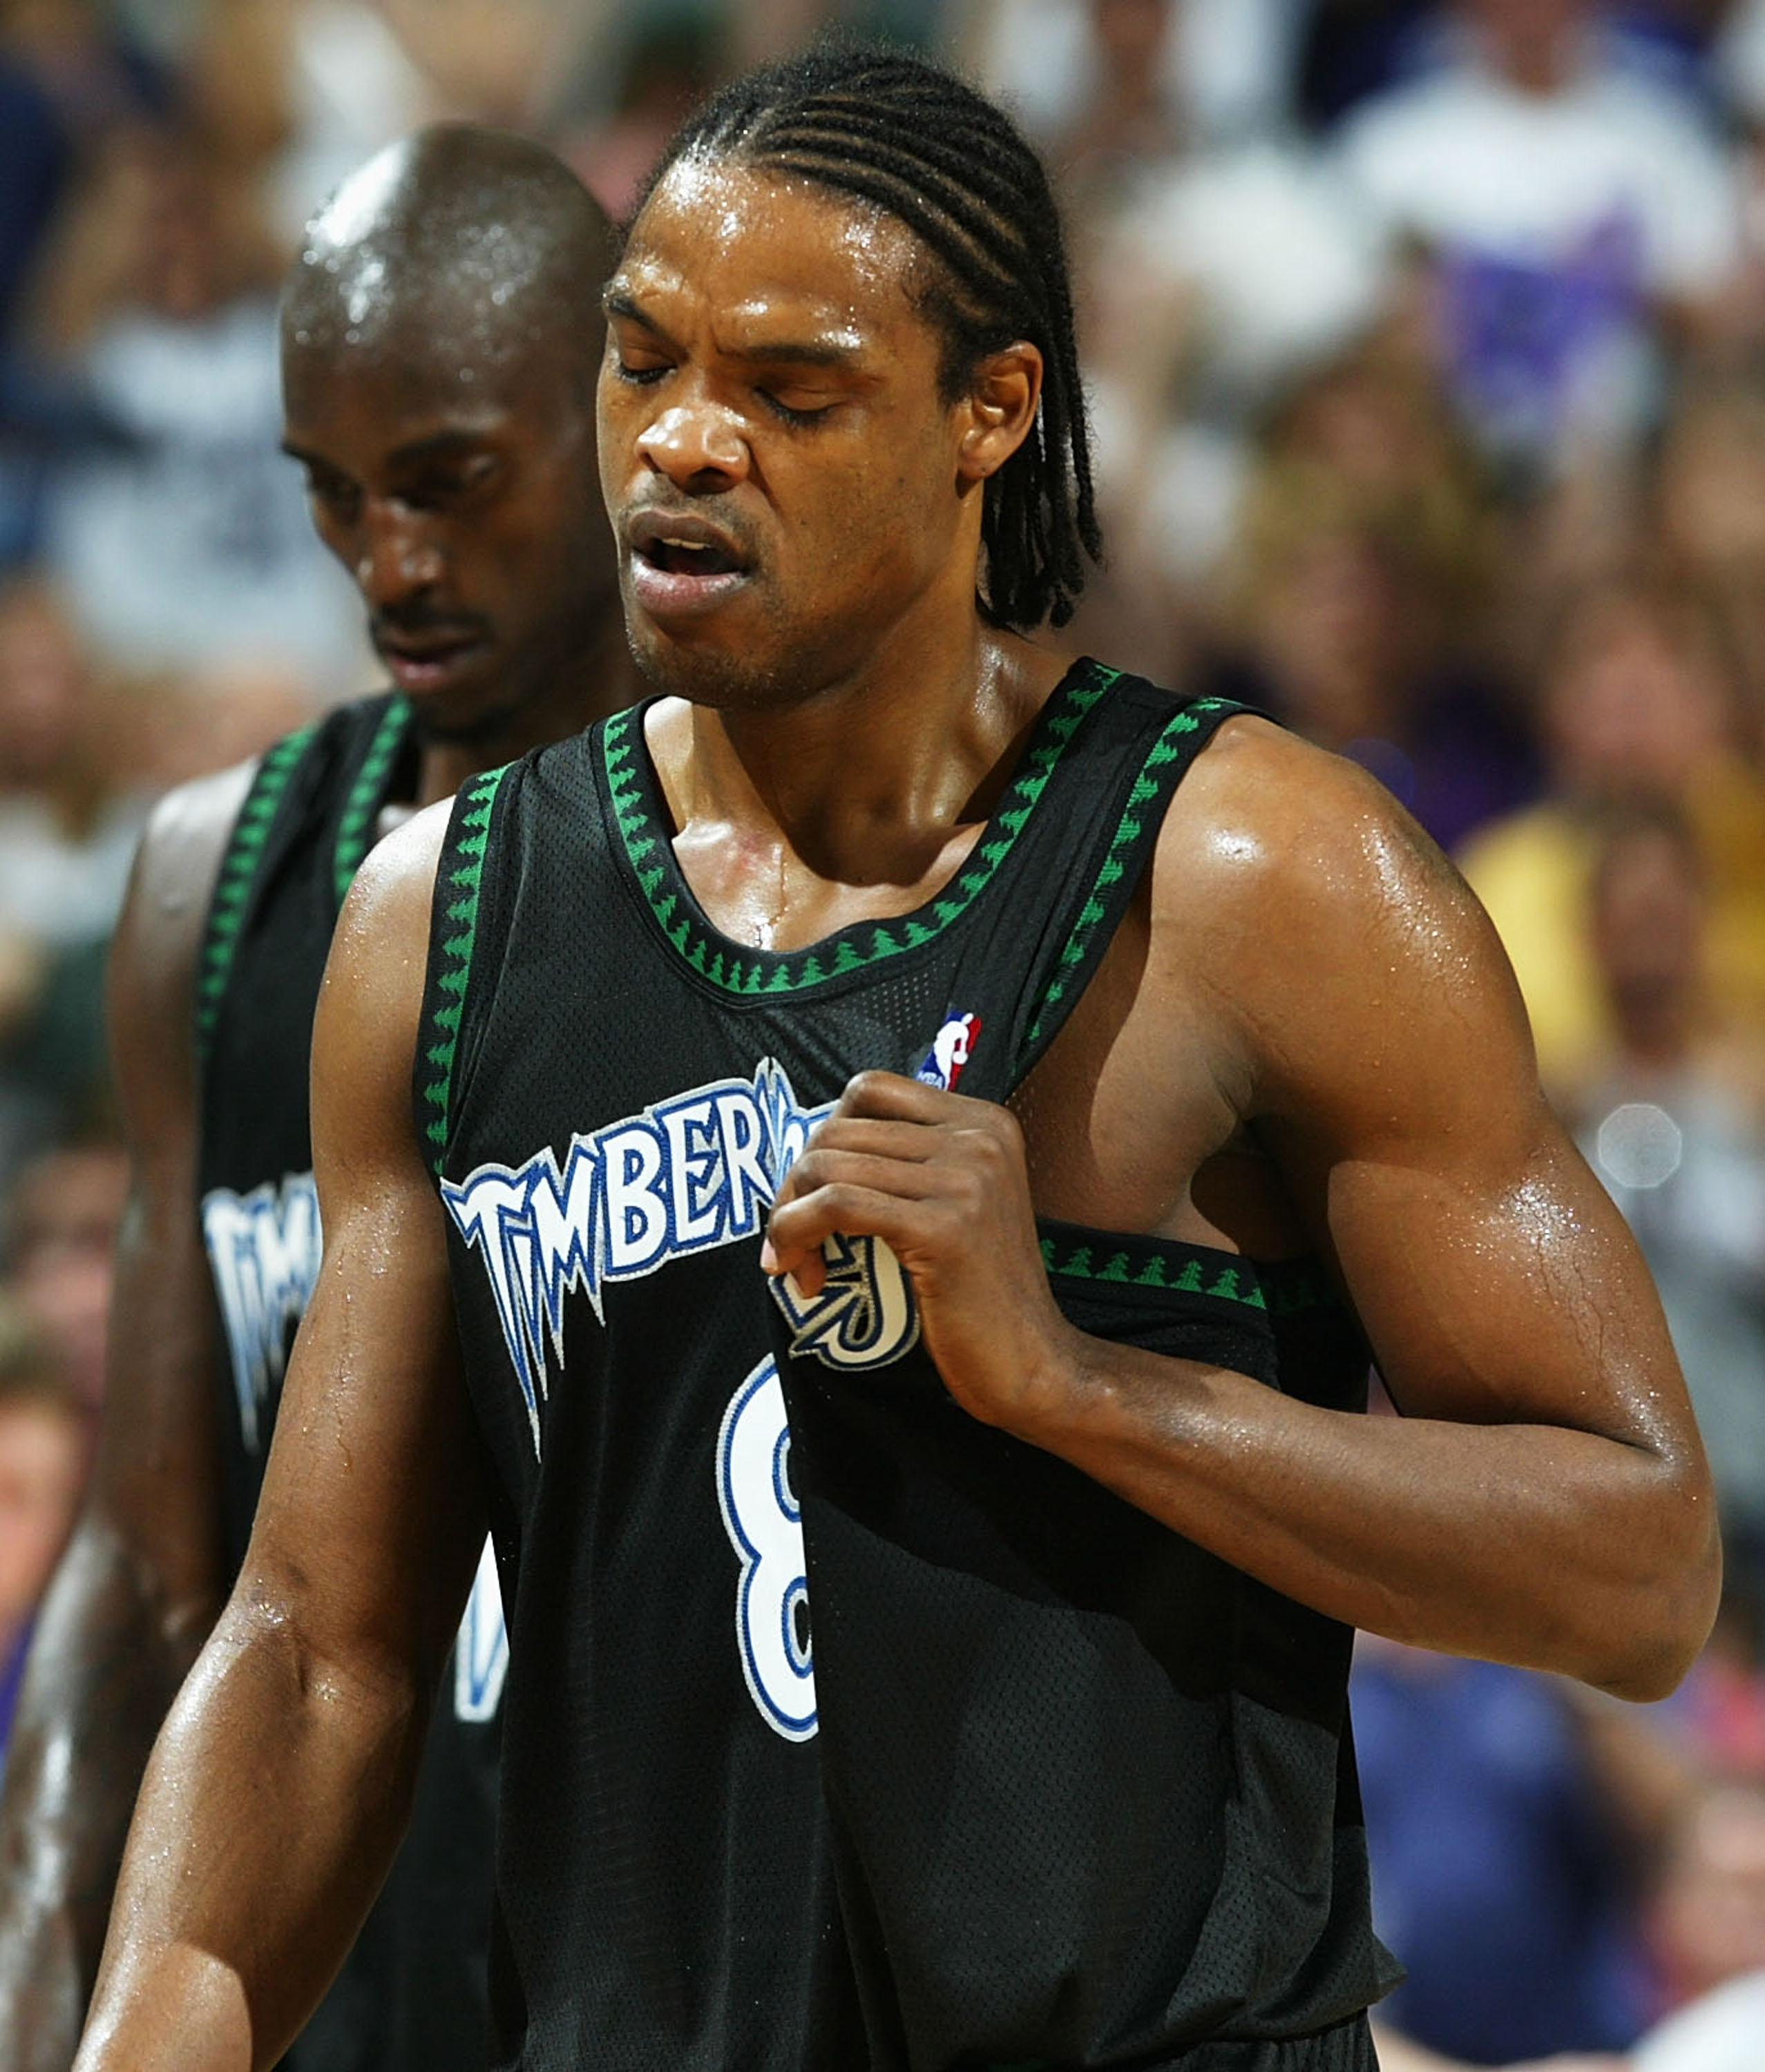 What's the best NBA jersey of all time?